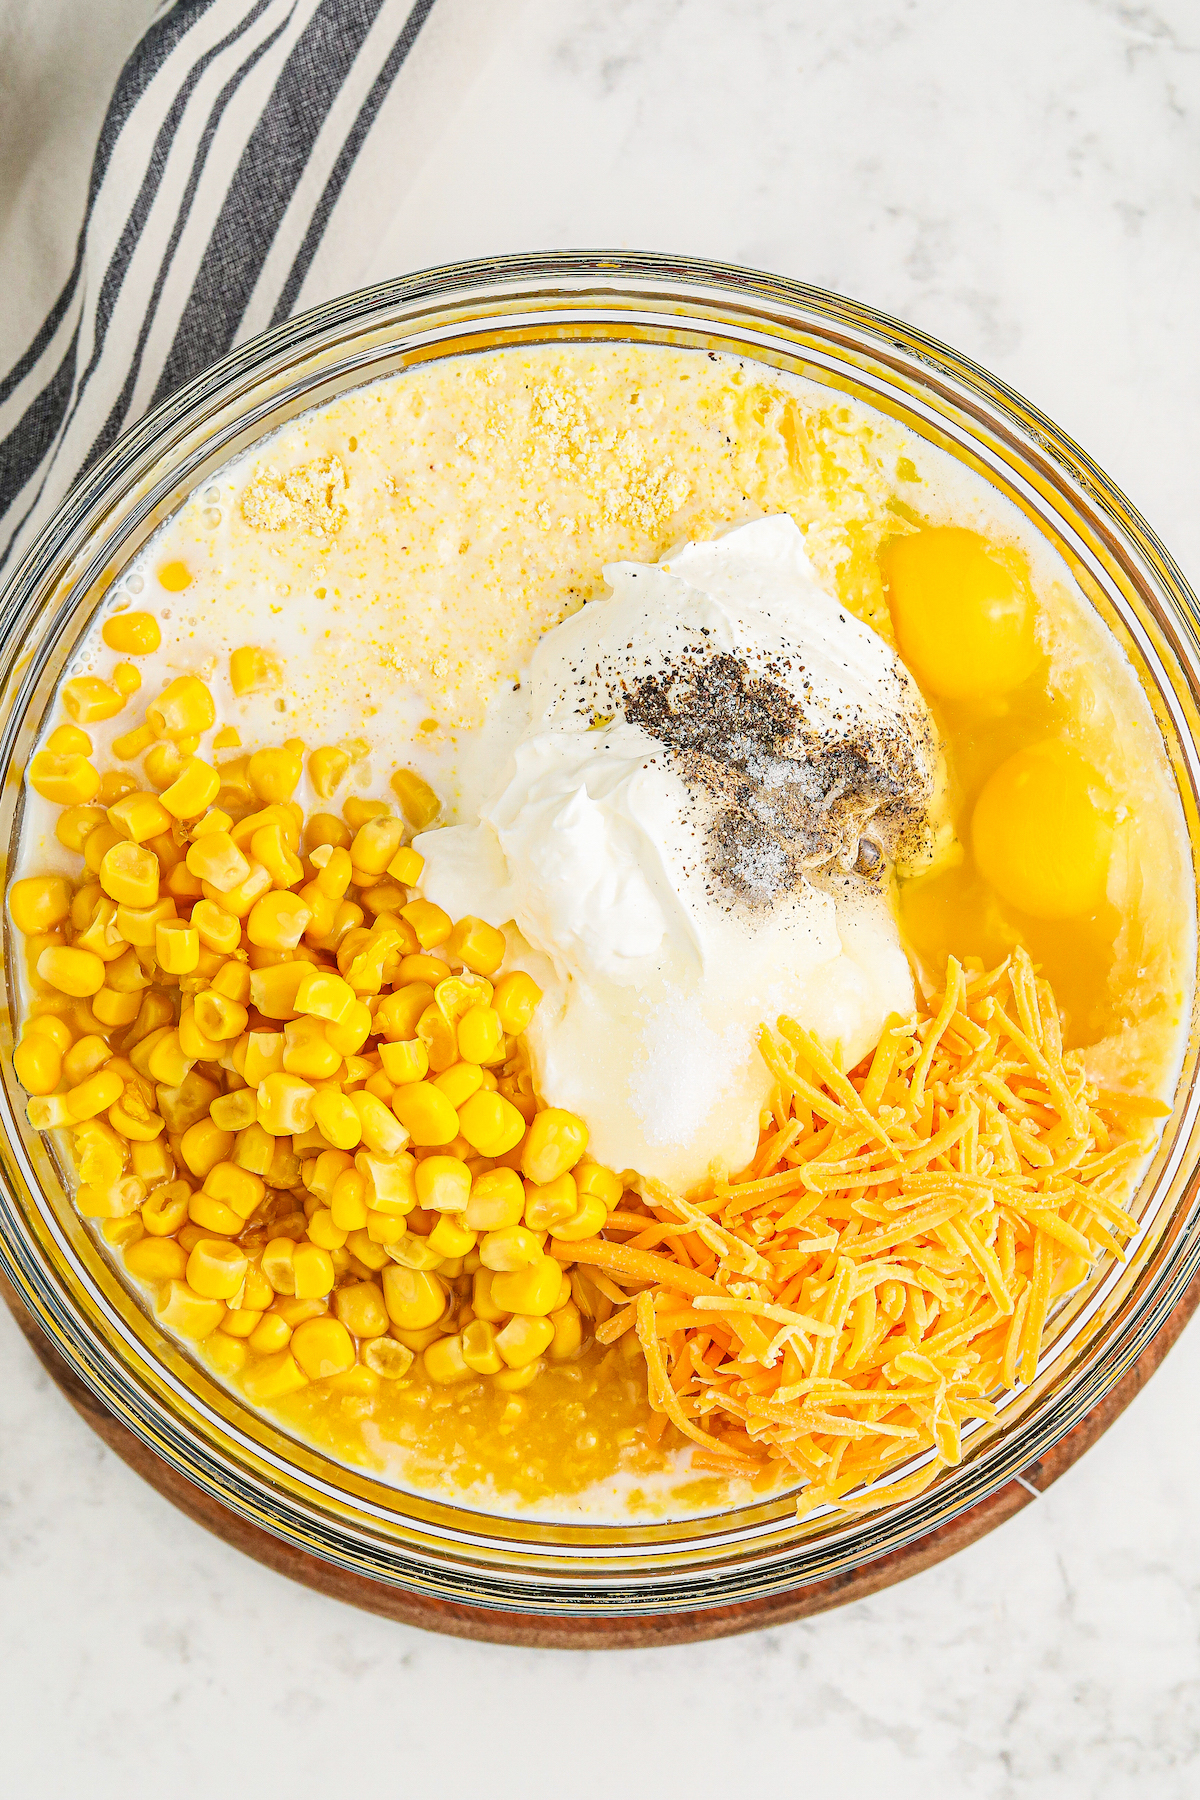 All ingredients for jiffy corn casserole recipe added to a mixing bowl.